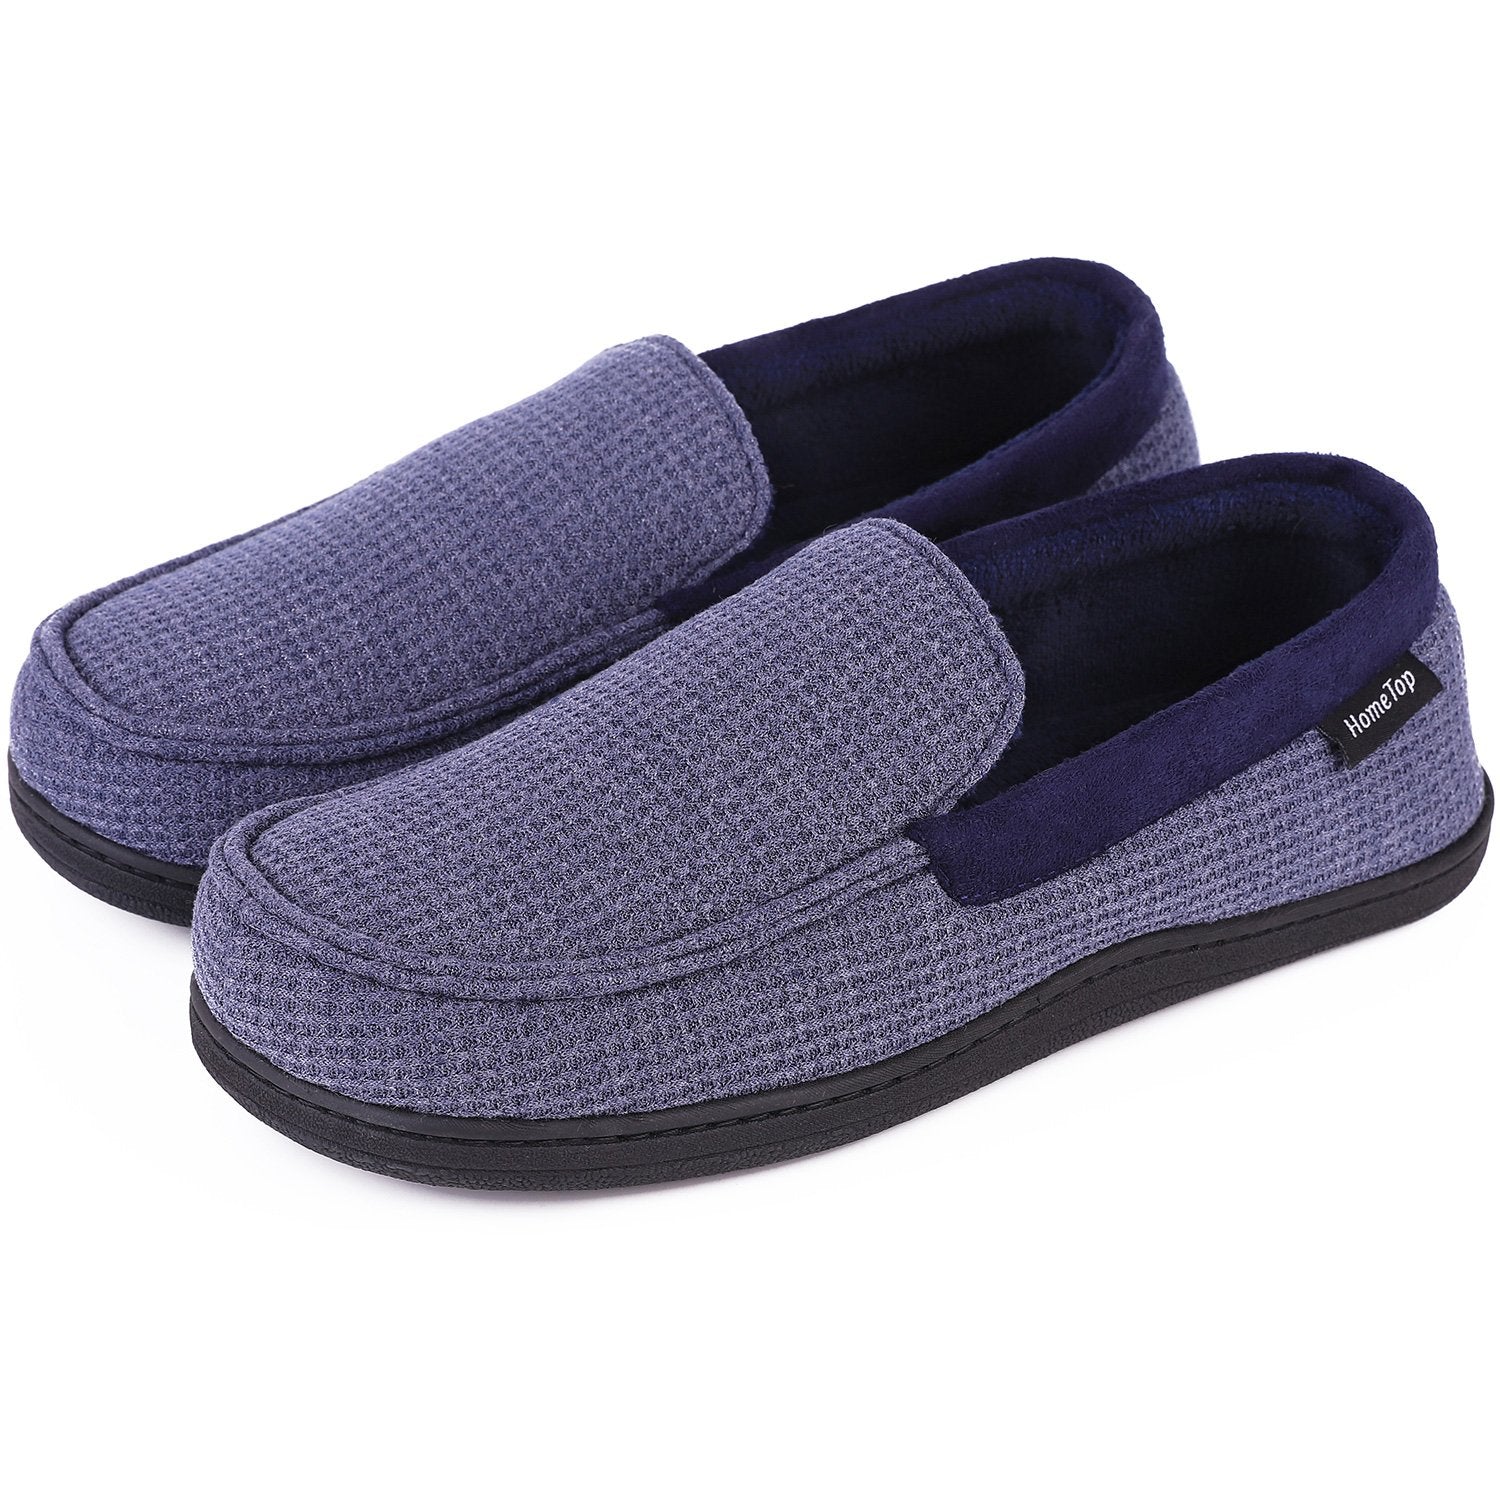 Breathable Cotton Knit Terry Cloth Moccasin Slipper